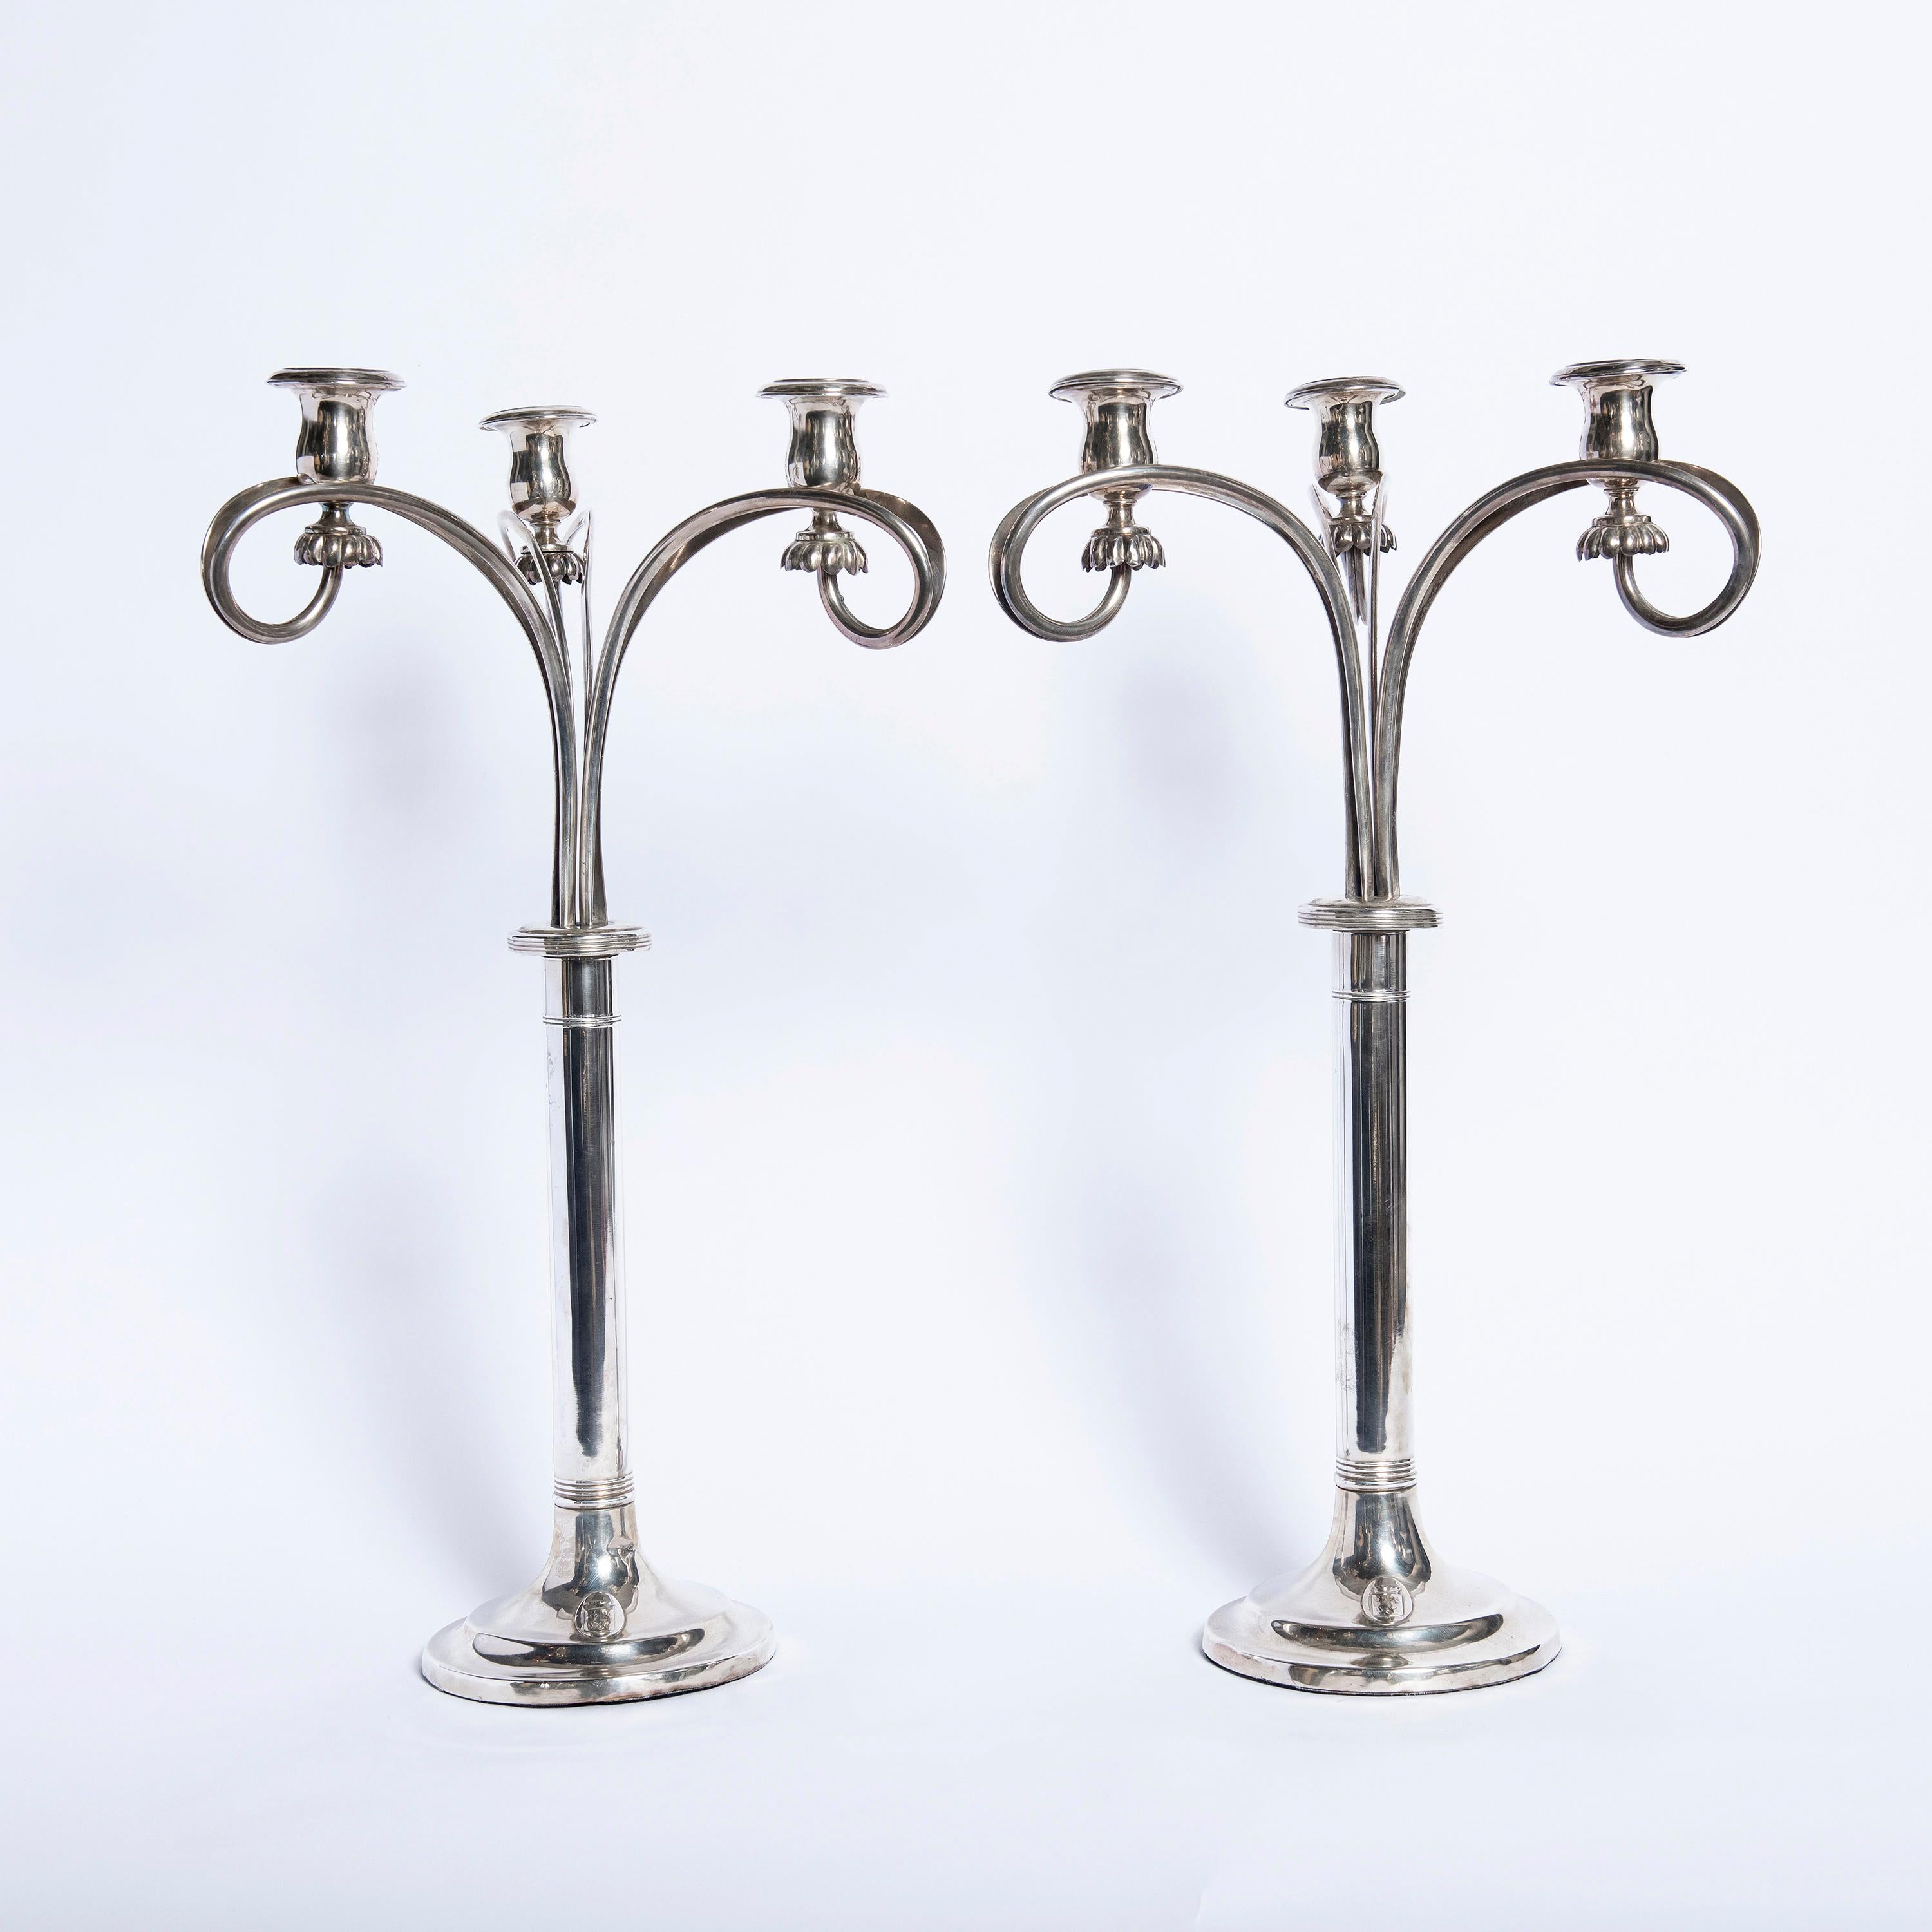 Pair of silver candelabras signed Mayerhofer, Austria, late 19th century.